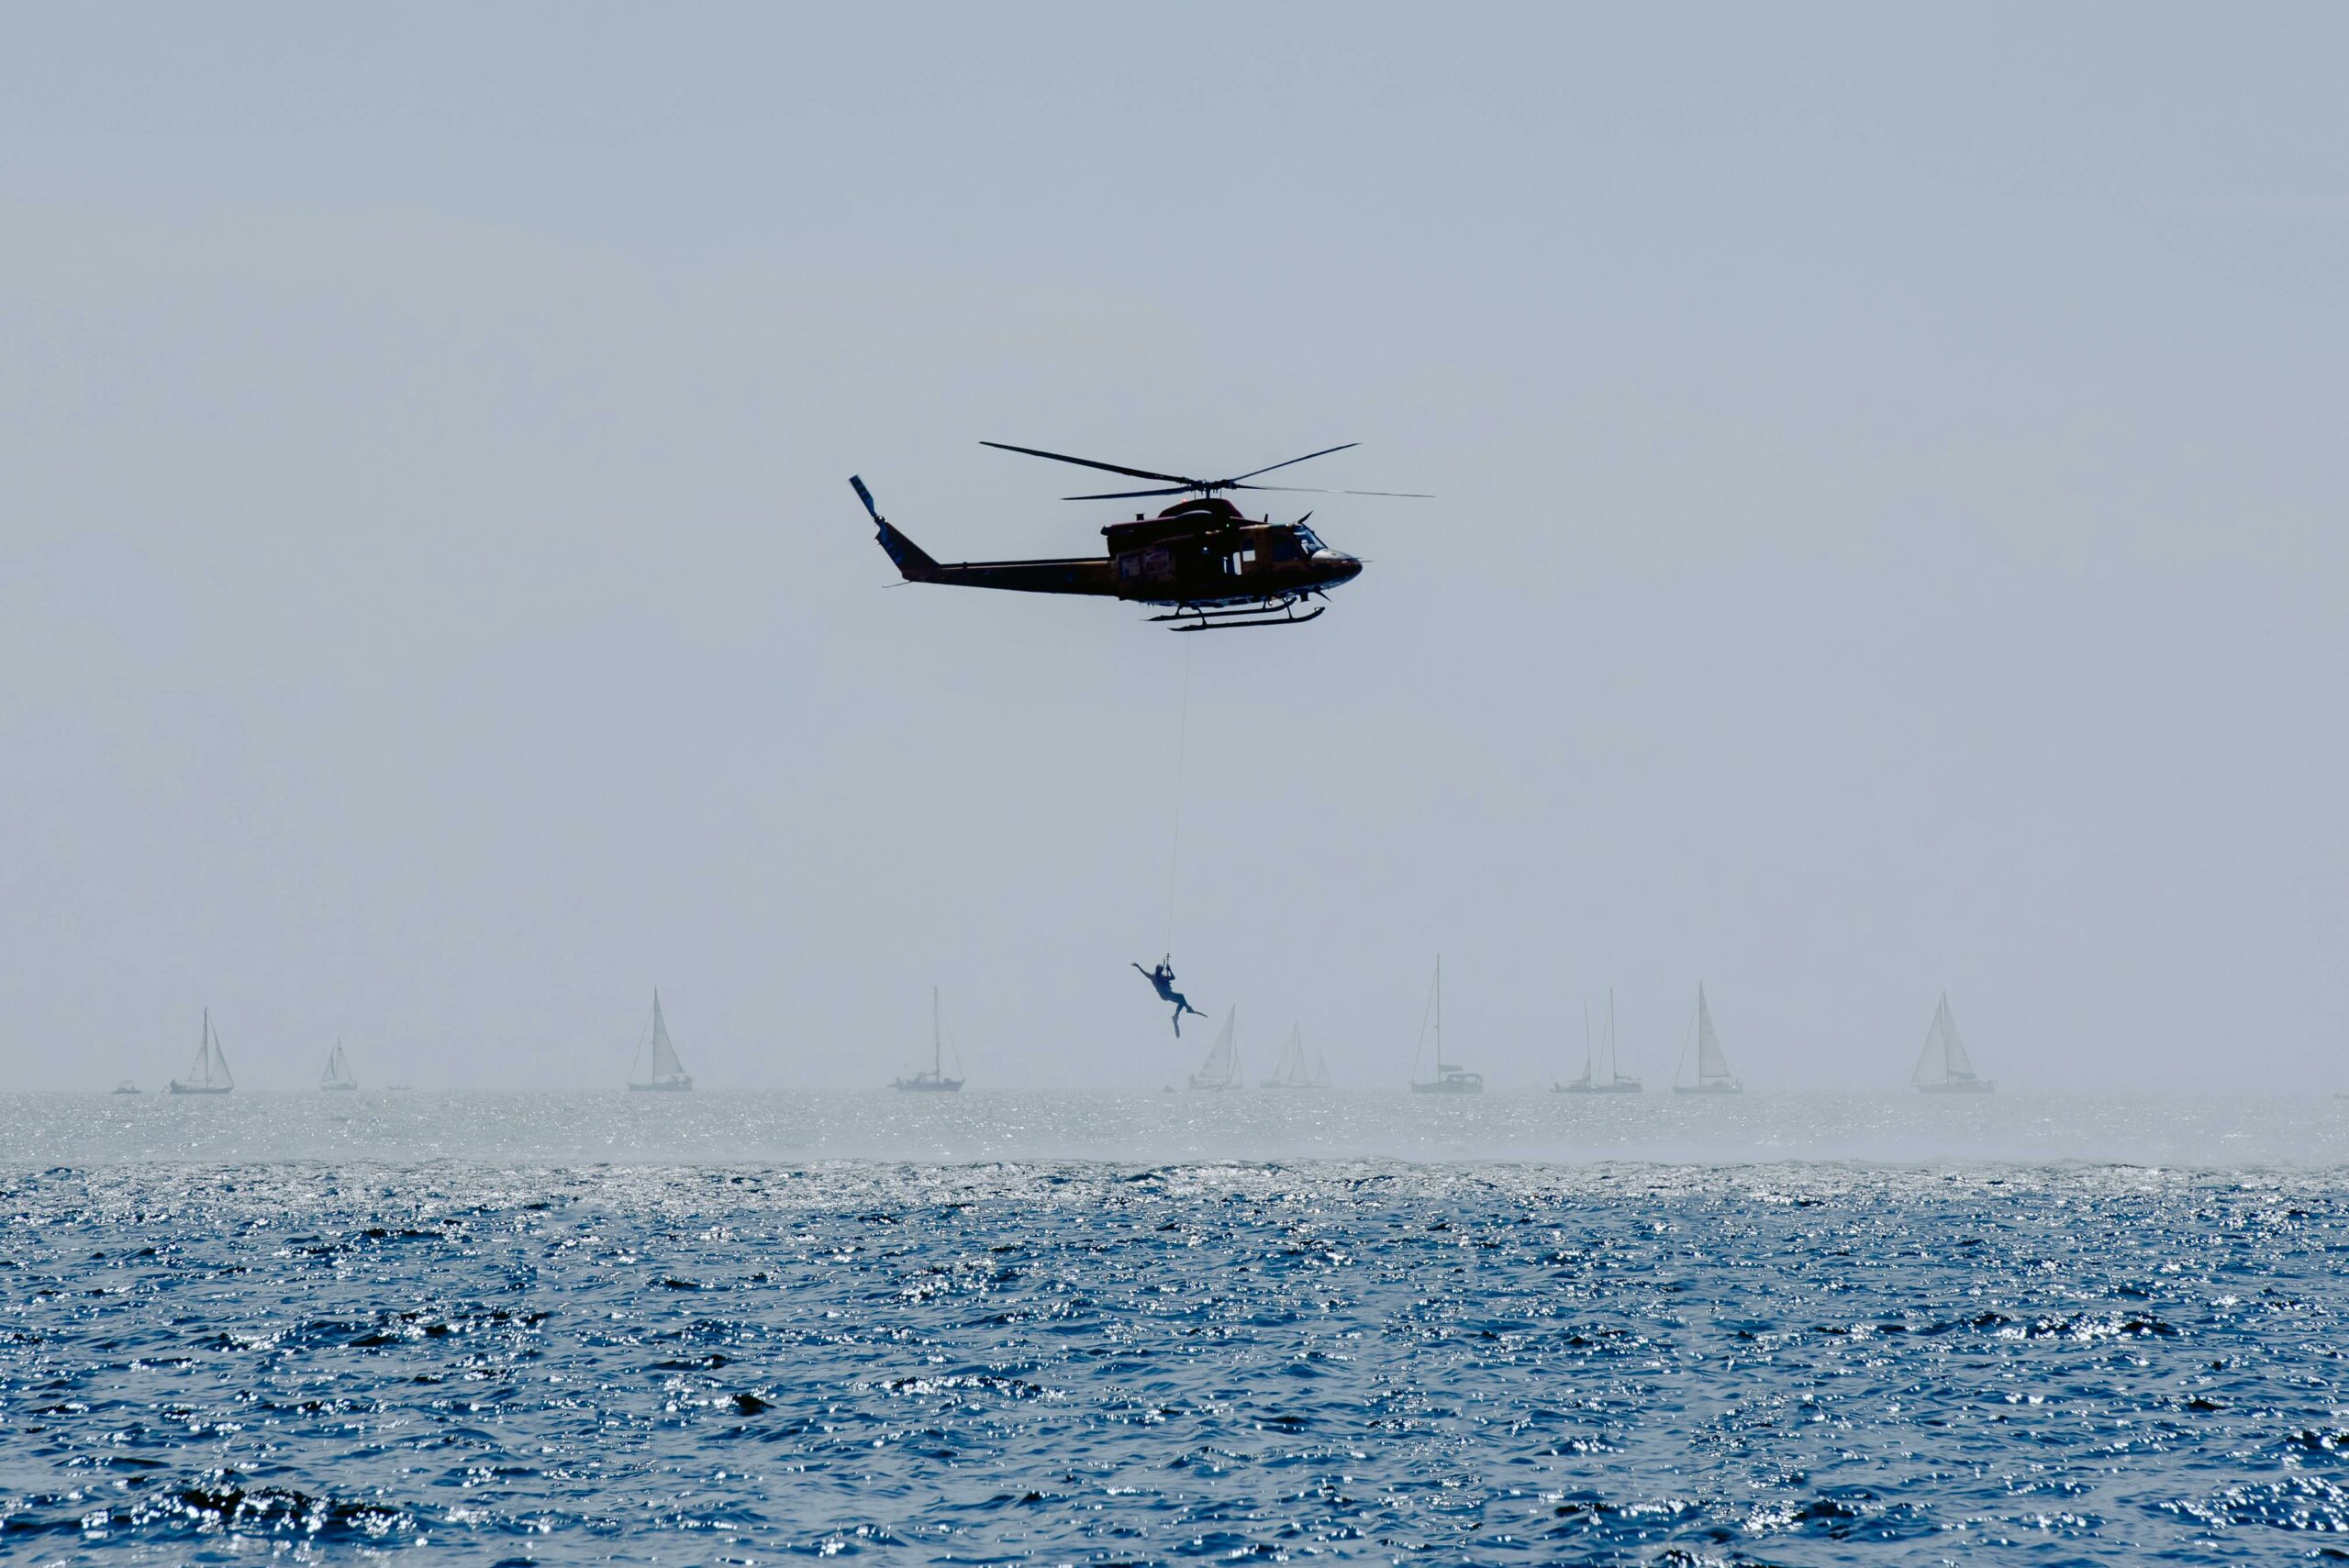 A helicopter flying over the ocean with waves visible below.